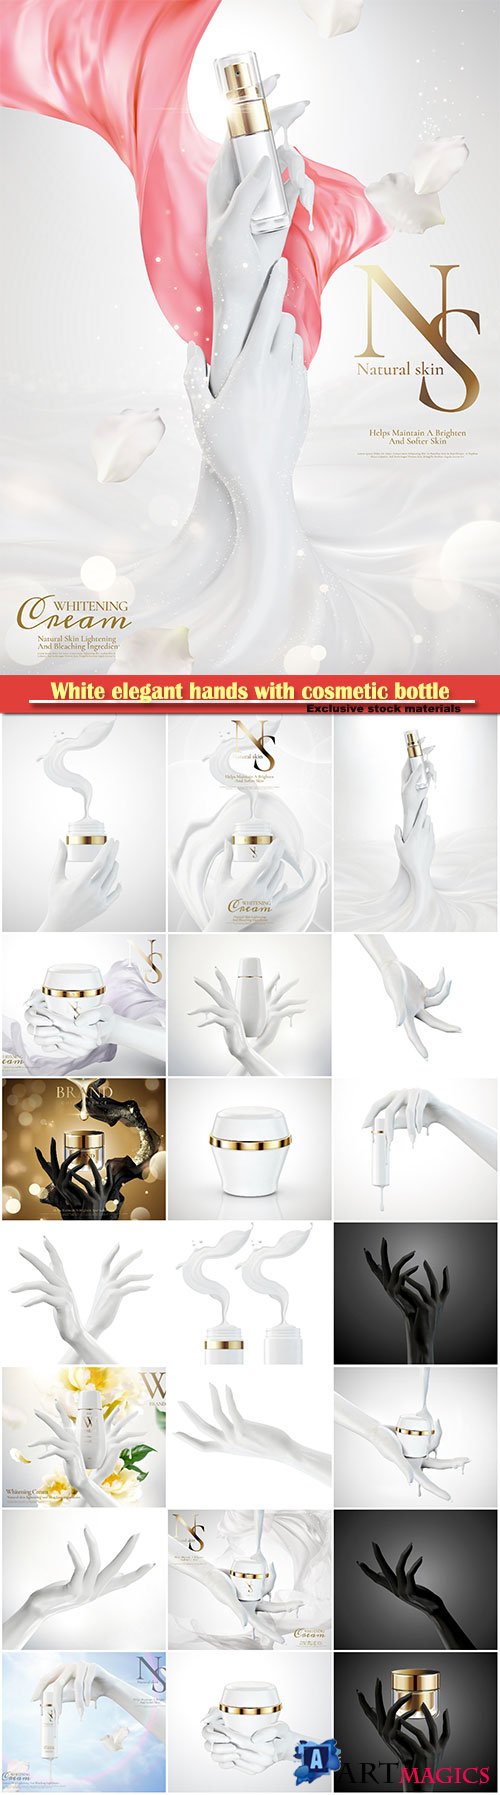 White elegant hands with cosmetic bottle in 3d illustration